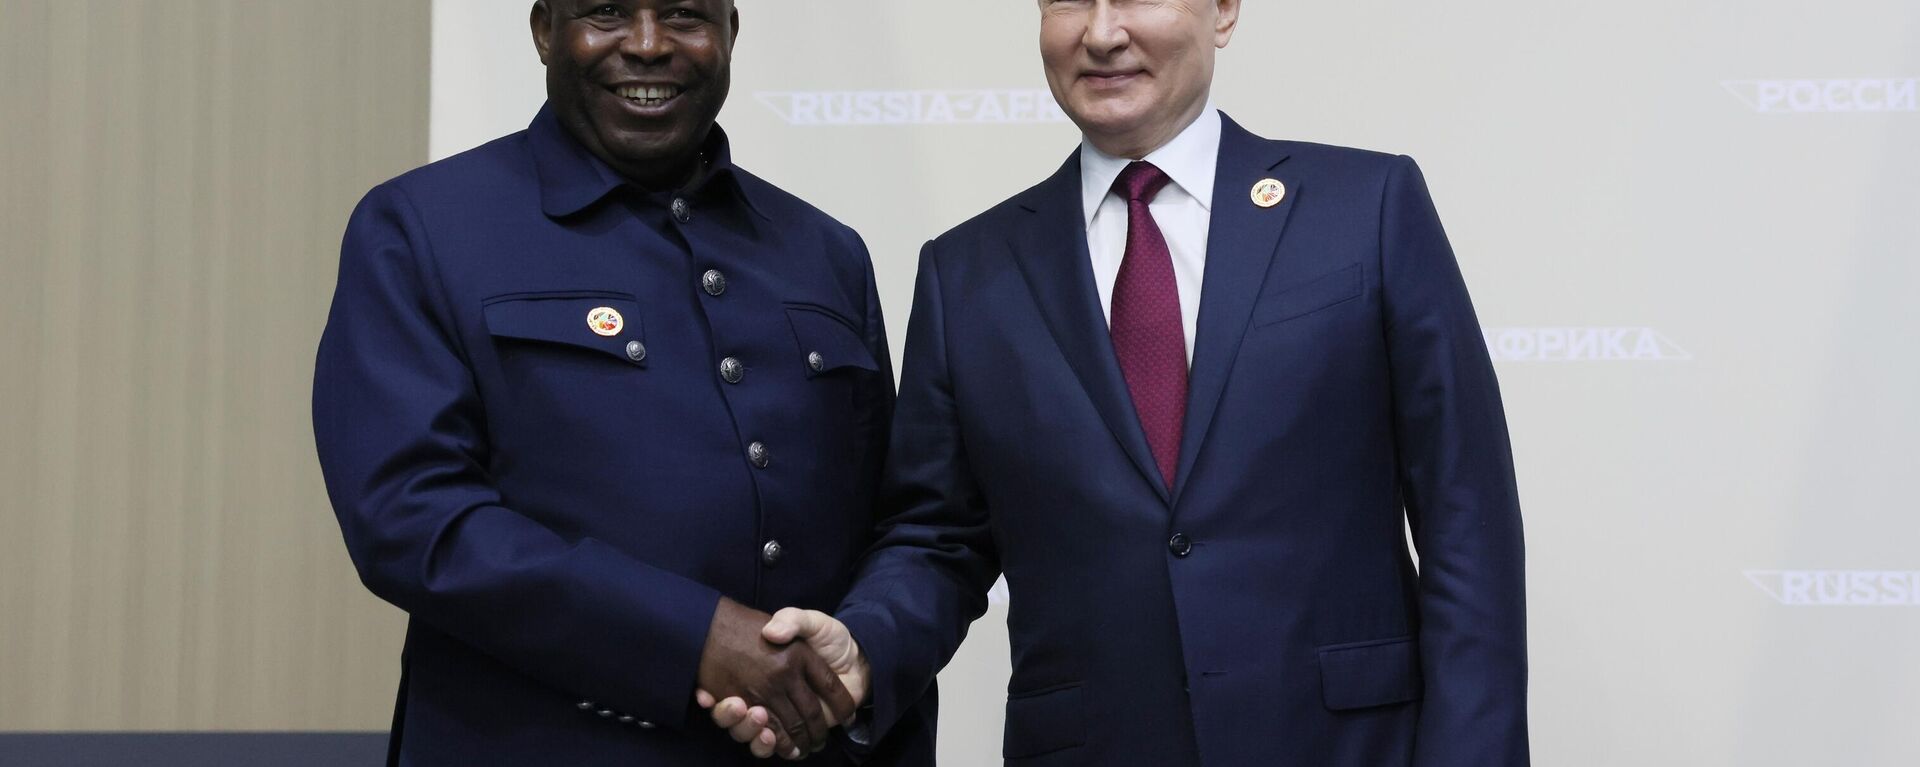  Russian President Vladimir Putin and President of Burundi Evariste Ndayishimye before the start of the plenary session of the II Russia-Africa Summit and Forum at the Expoforum Convention and Exhibition Center July 27, 2023 - Sputnik Africa, 1920, 27.07.2023